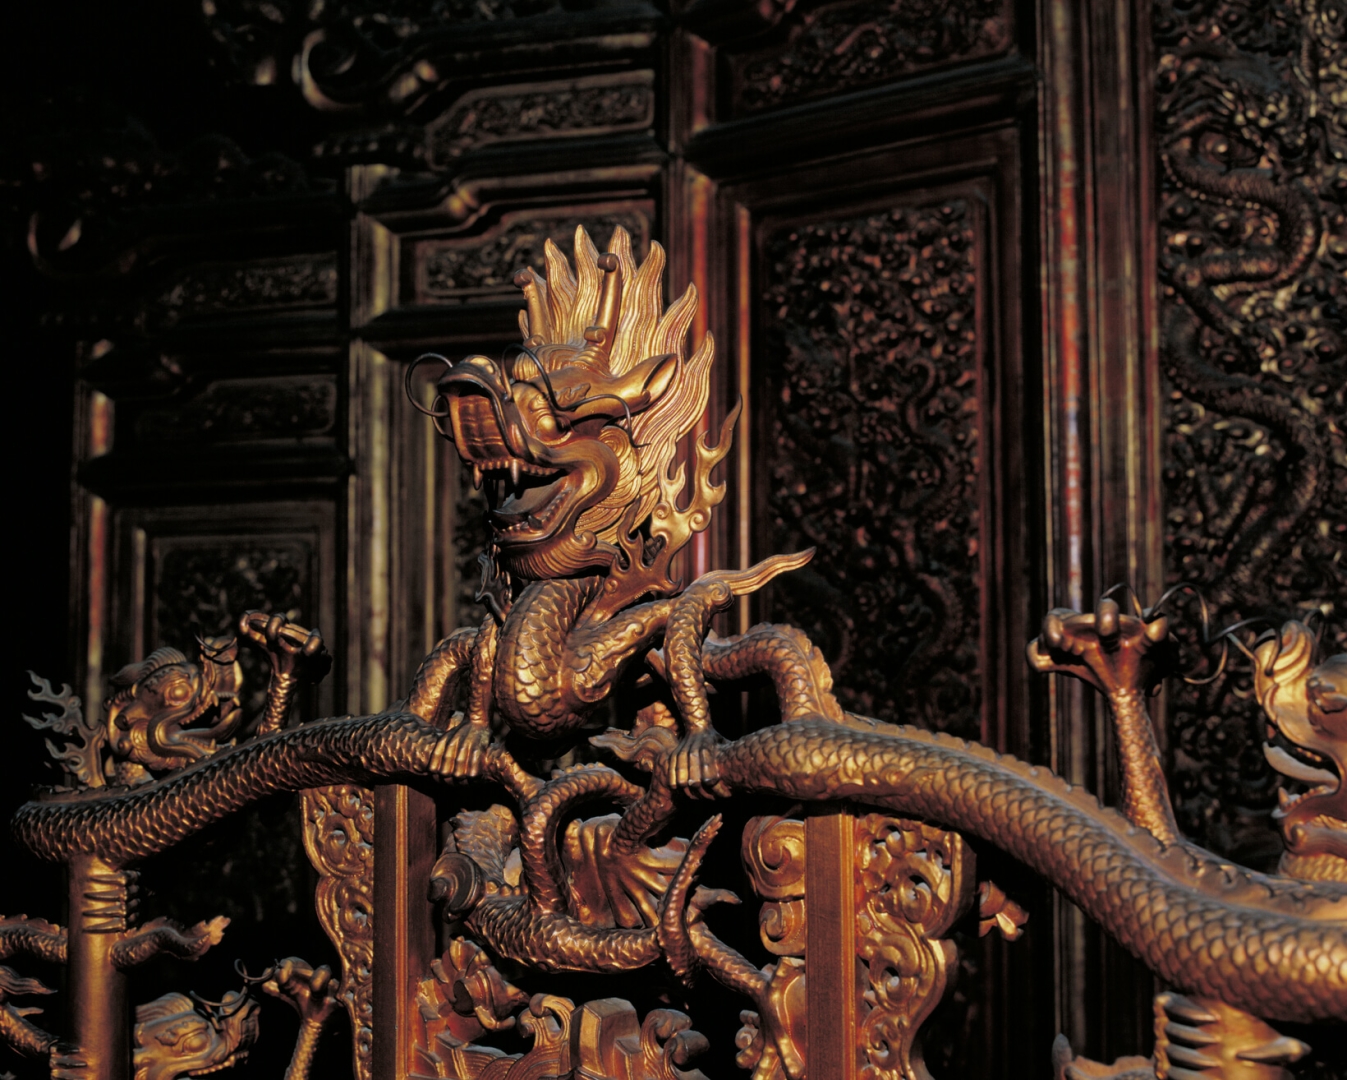 Golden Columns with Coiled <br />
Dragons and Throne with <br />
Dragon Crest in the Hall of <br />
Supreme Harmony